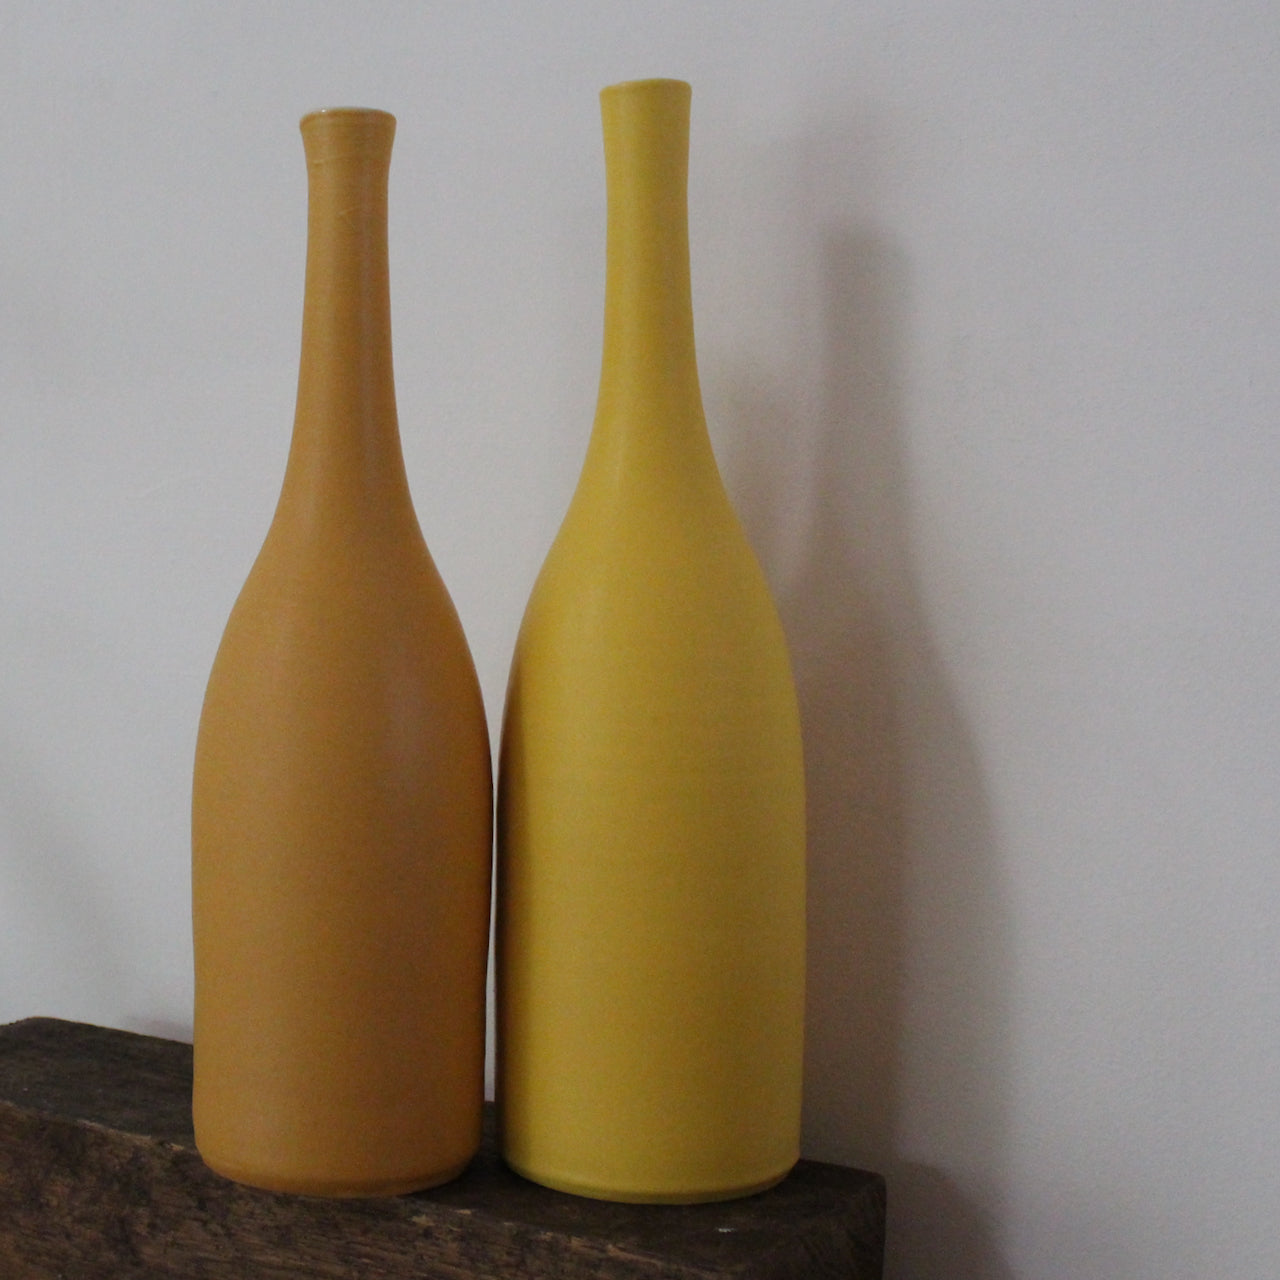  two yellow ceramic bottles by UK ceramicist Lucy Burley 